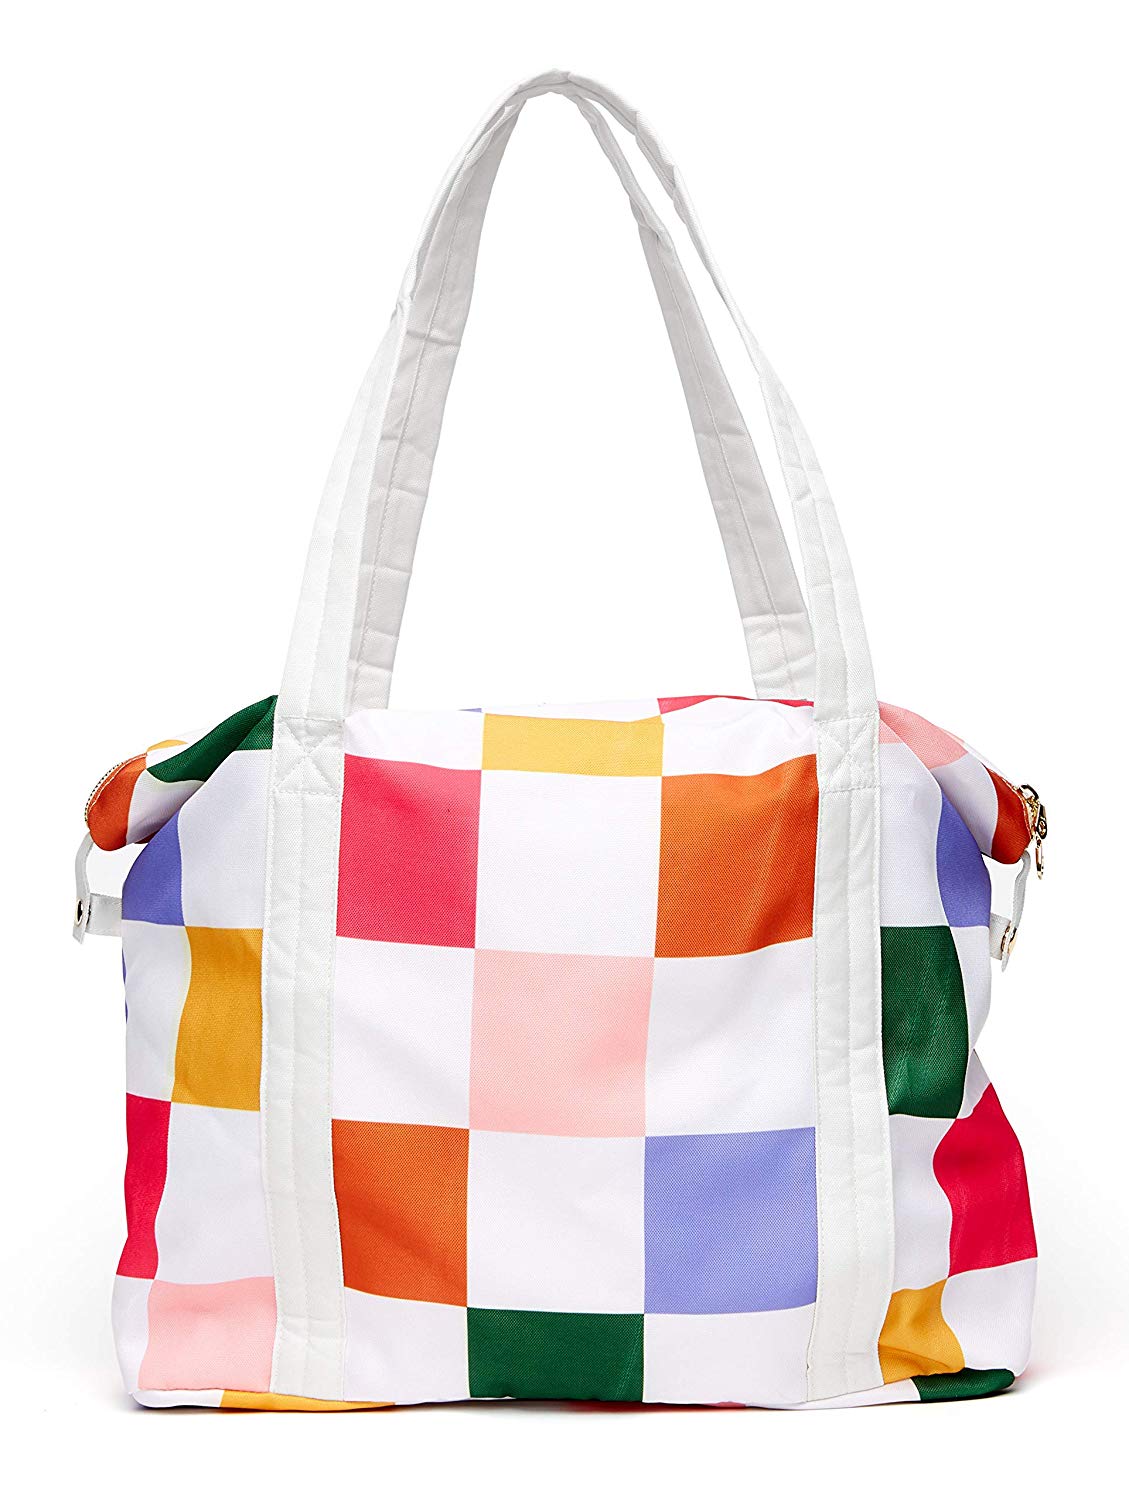 A colorful weekend bag.